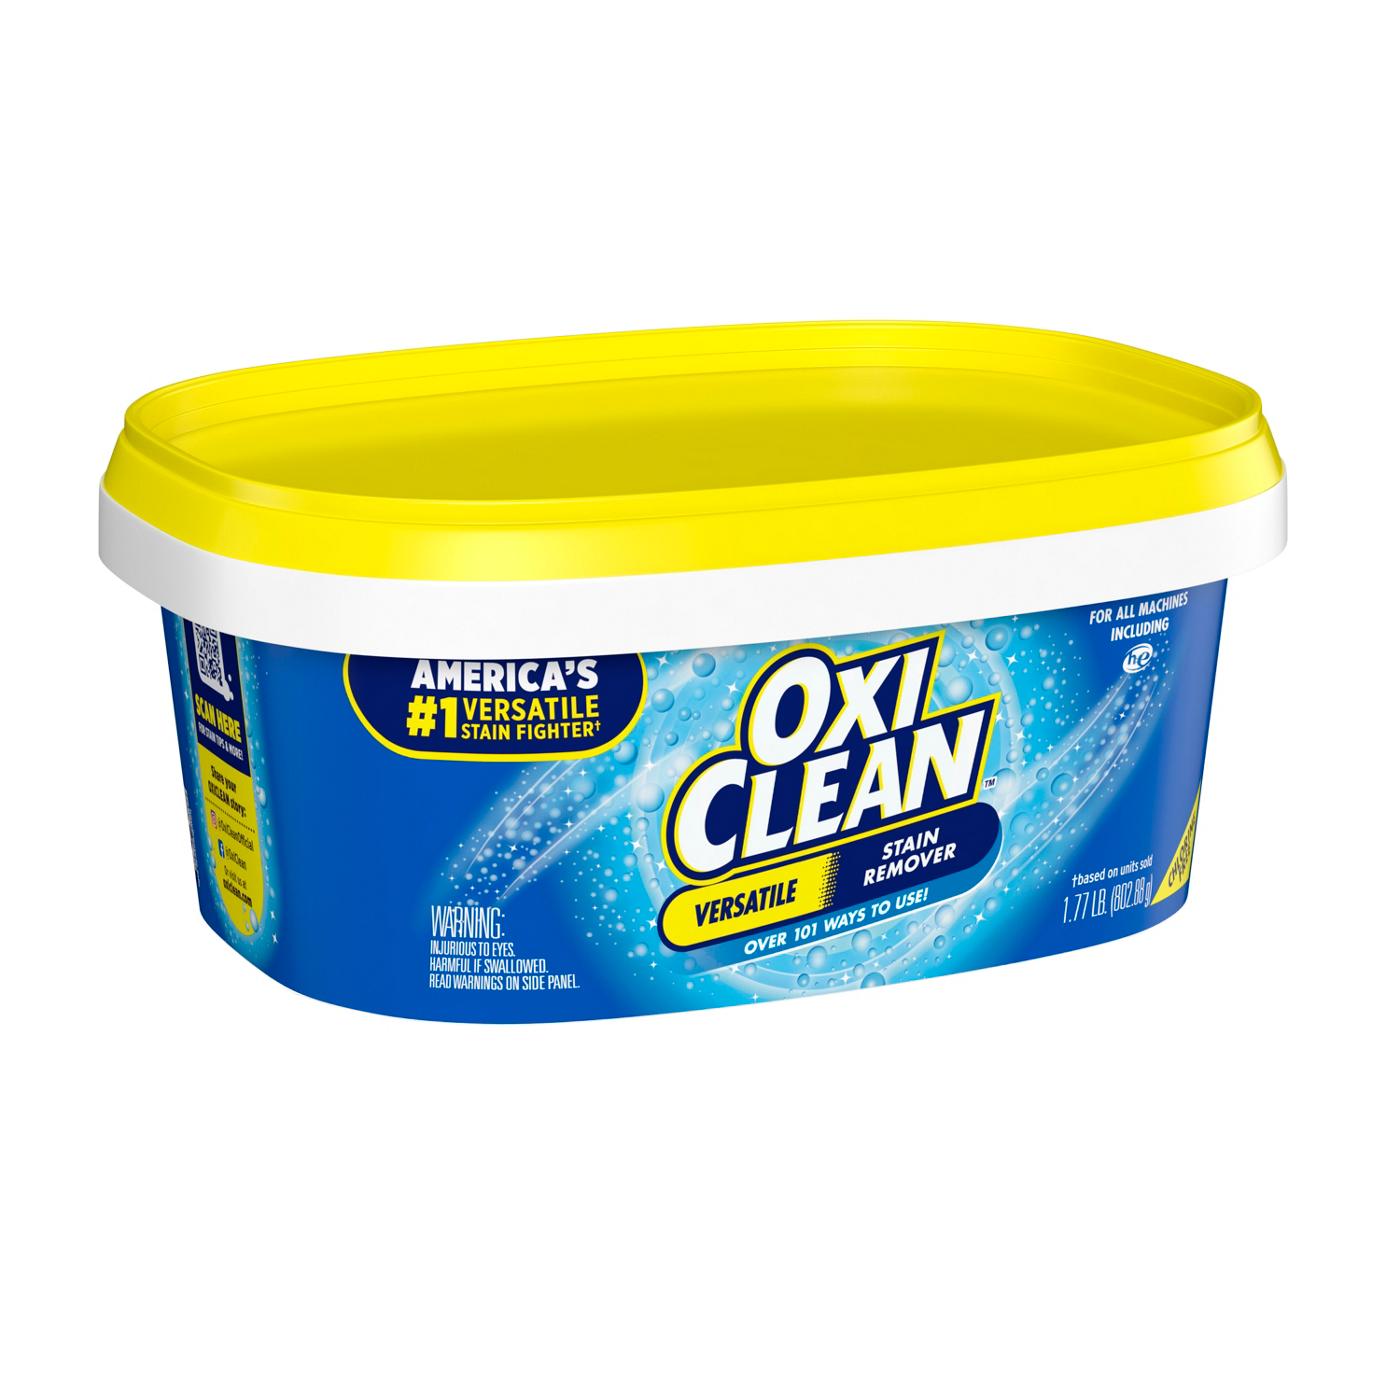 OxiClean Versatile Stain Remover; image 2 of 3